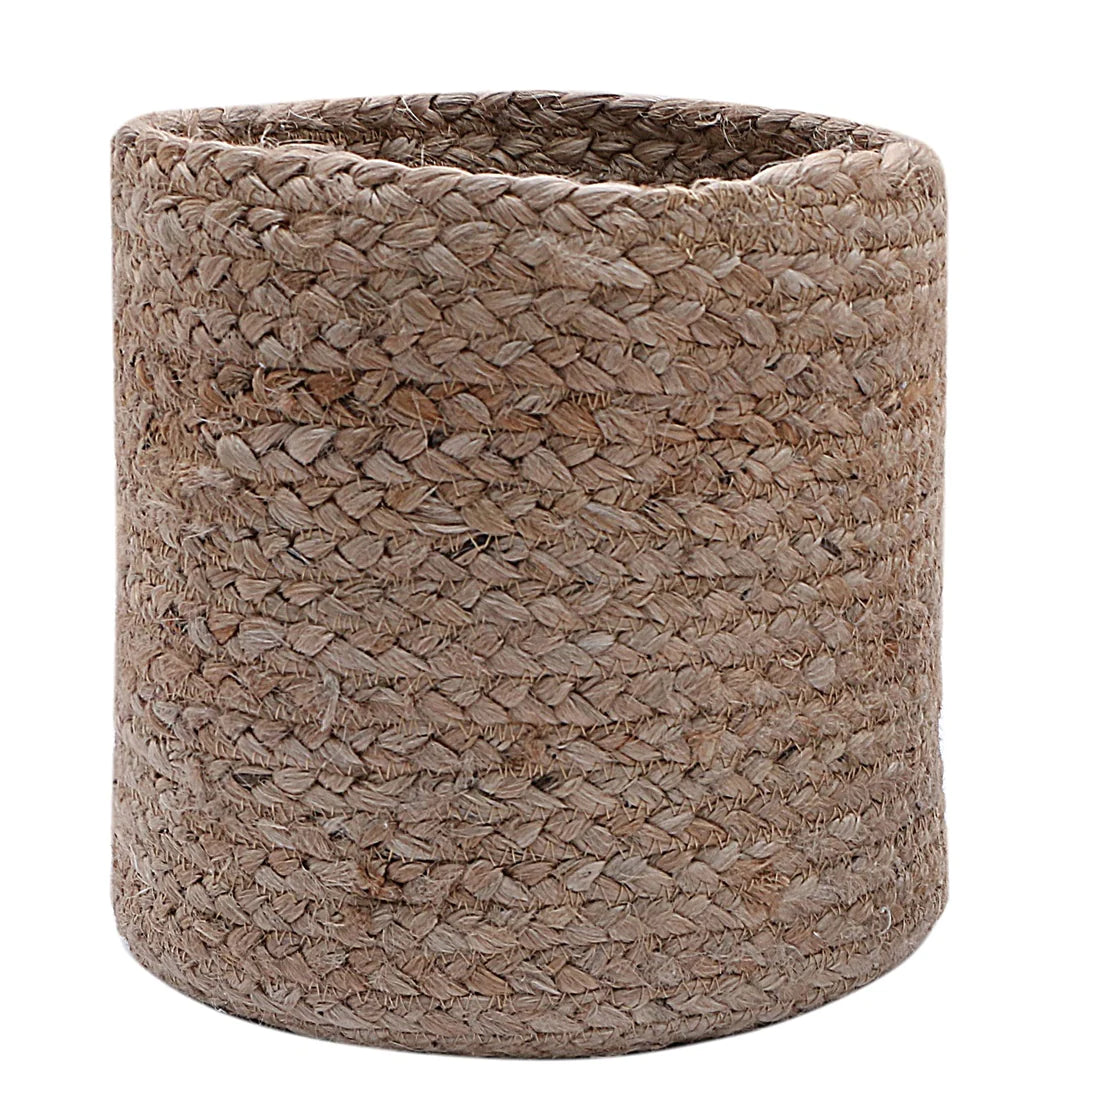 Jute Braided Basket - 6 Inches